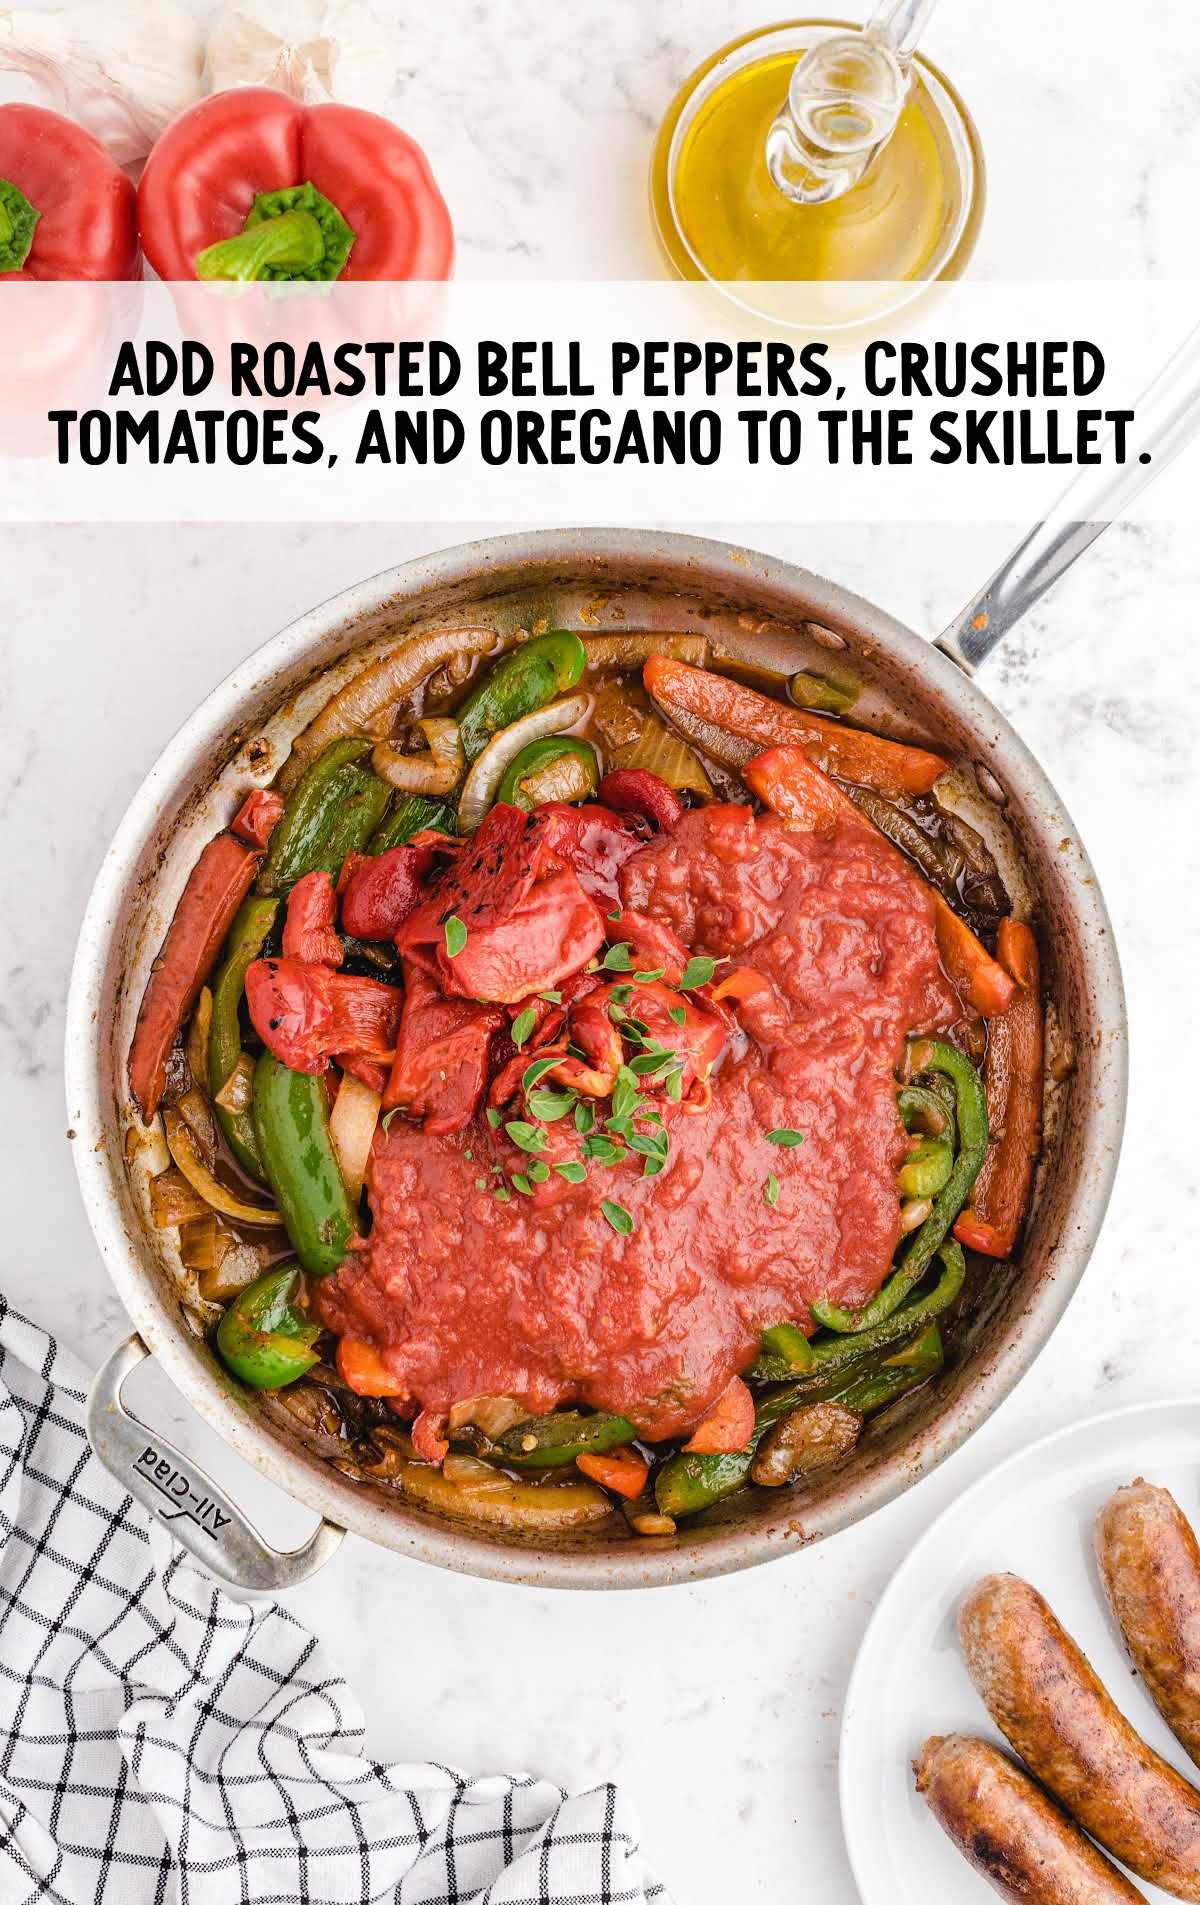 bell peppers, crushed tomatoes, and oregano added to the skillet